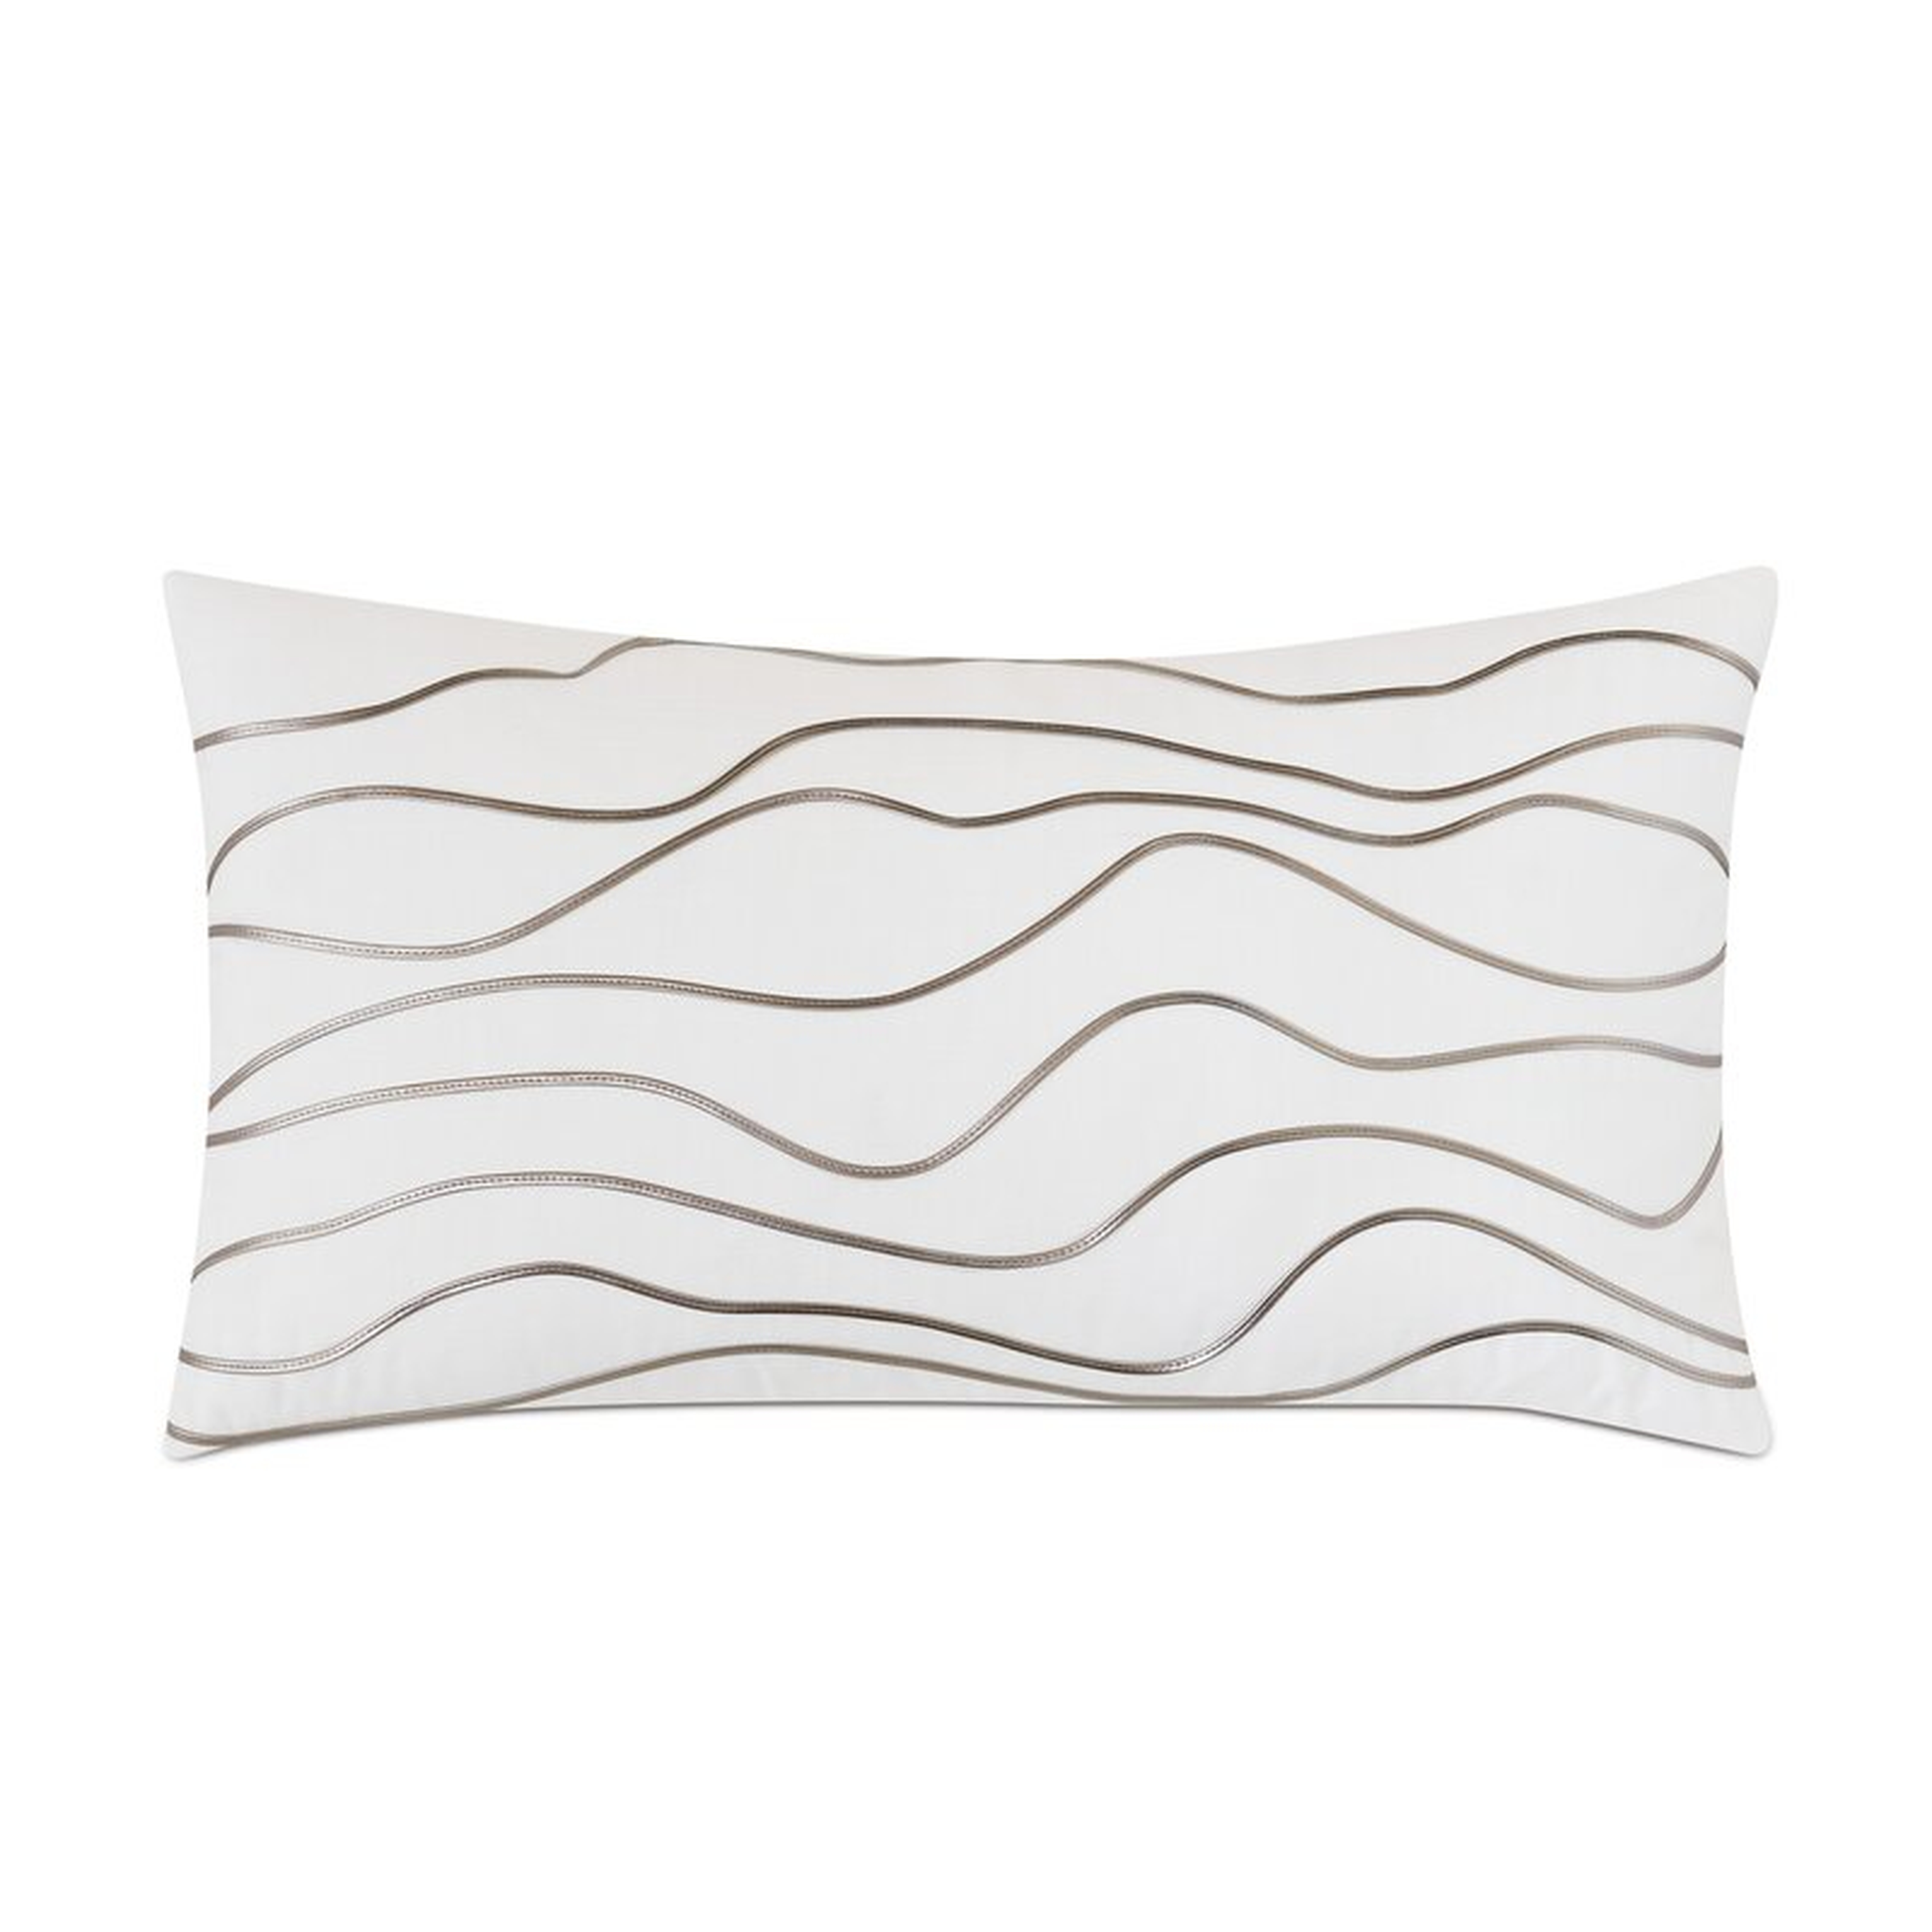 Eastern Accents Banks rectangular Pillow Cover & Insert - Perigold